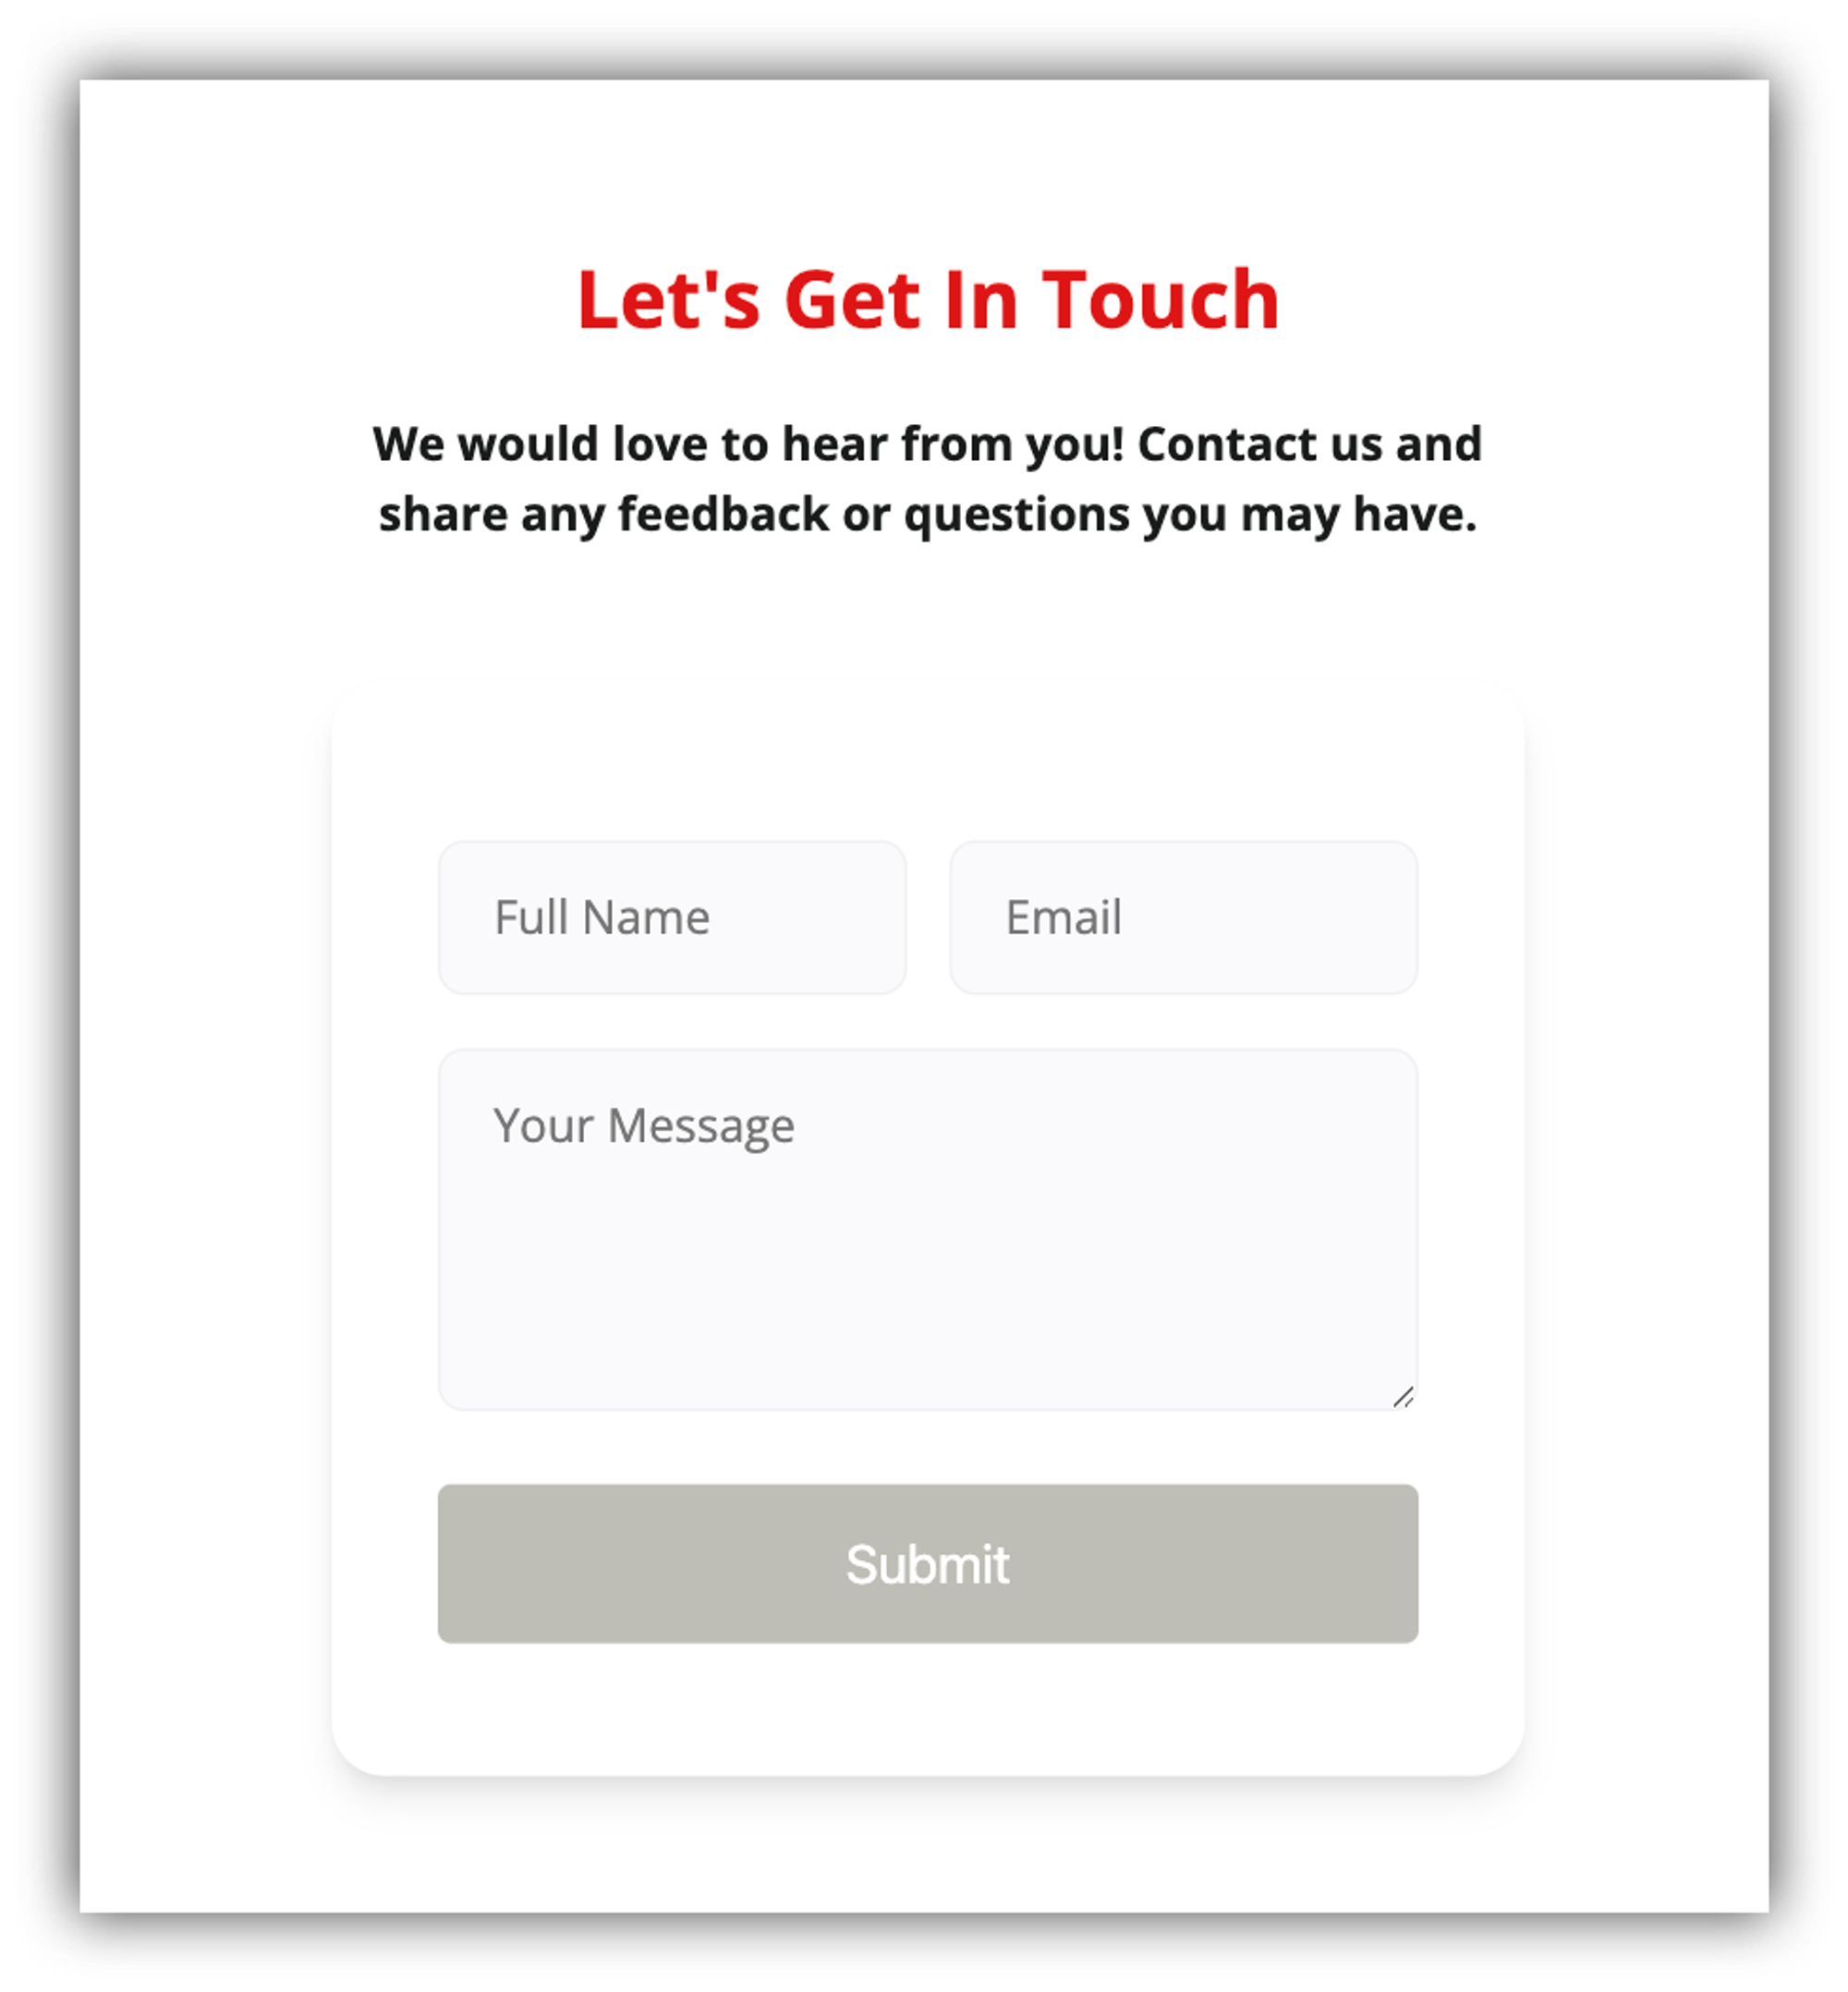 A simple contact form